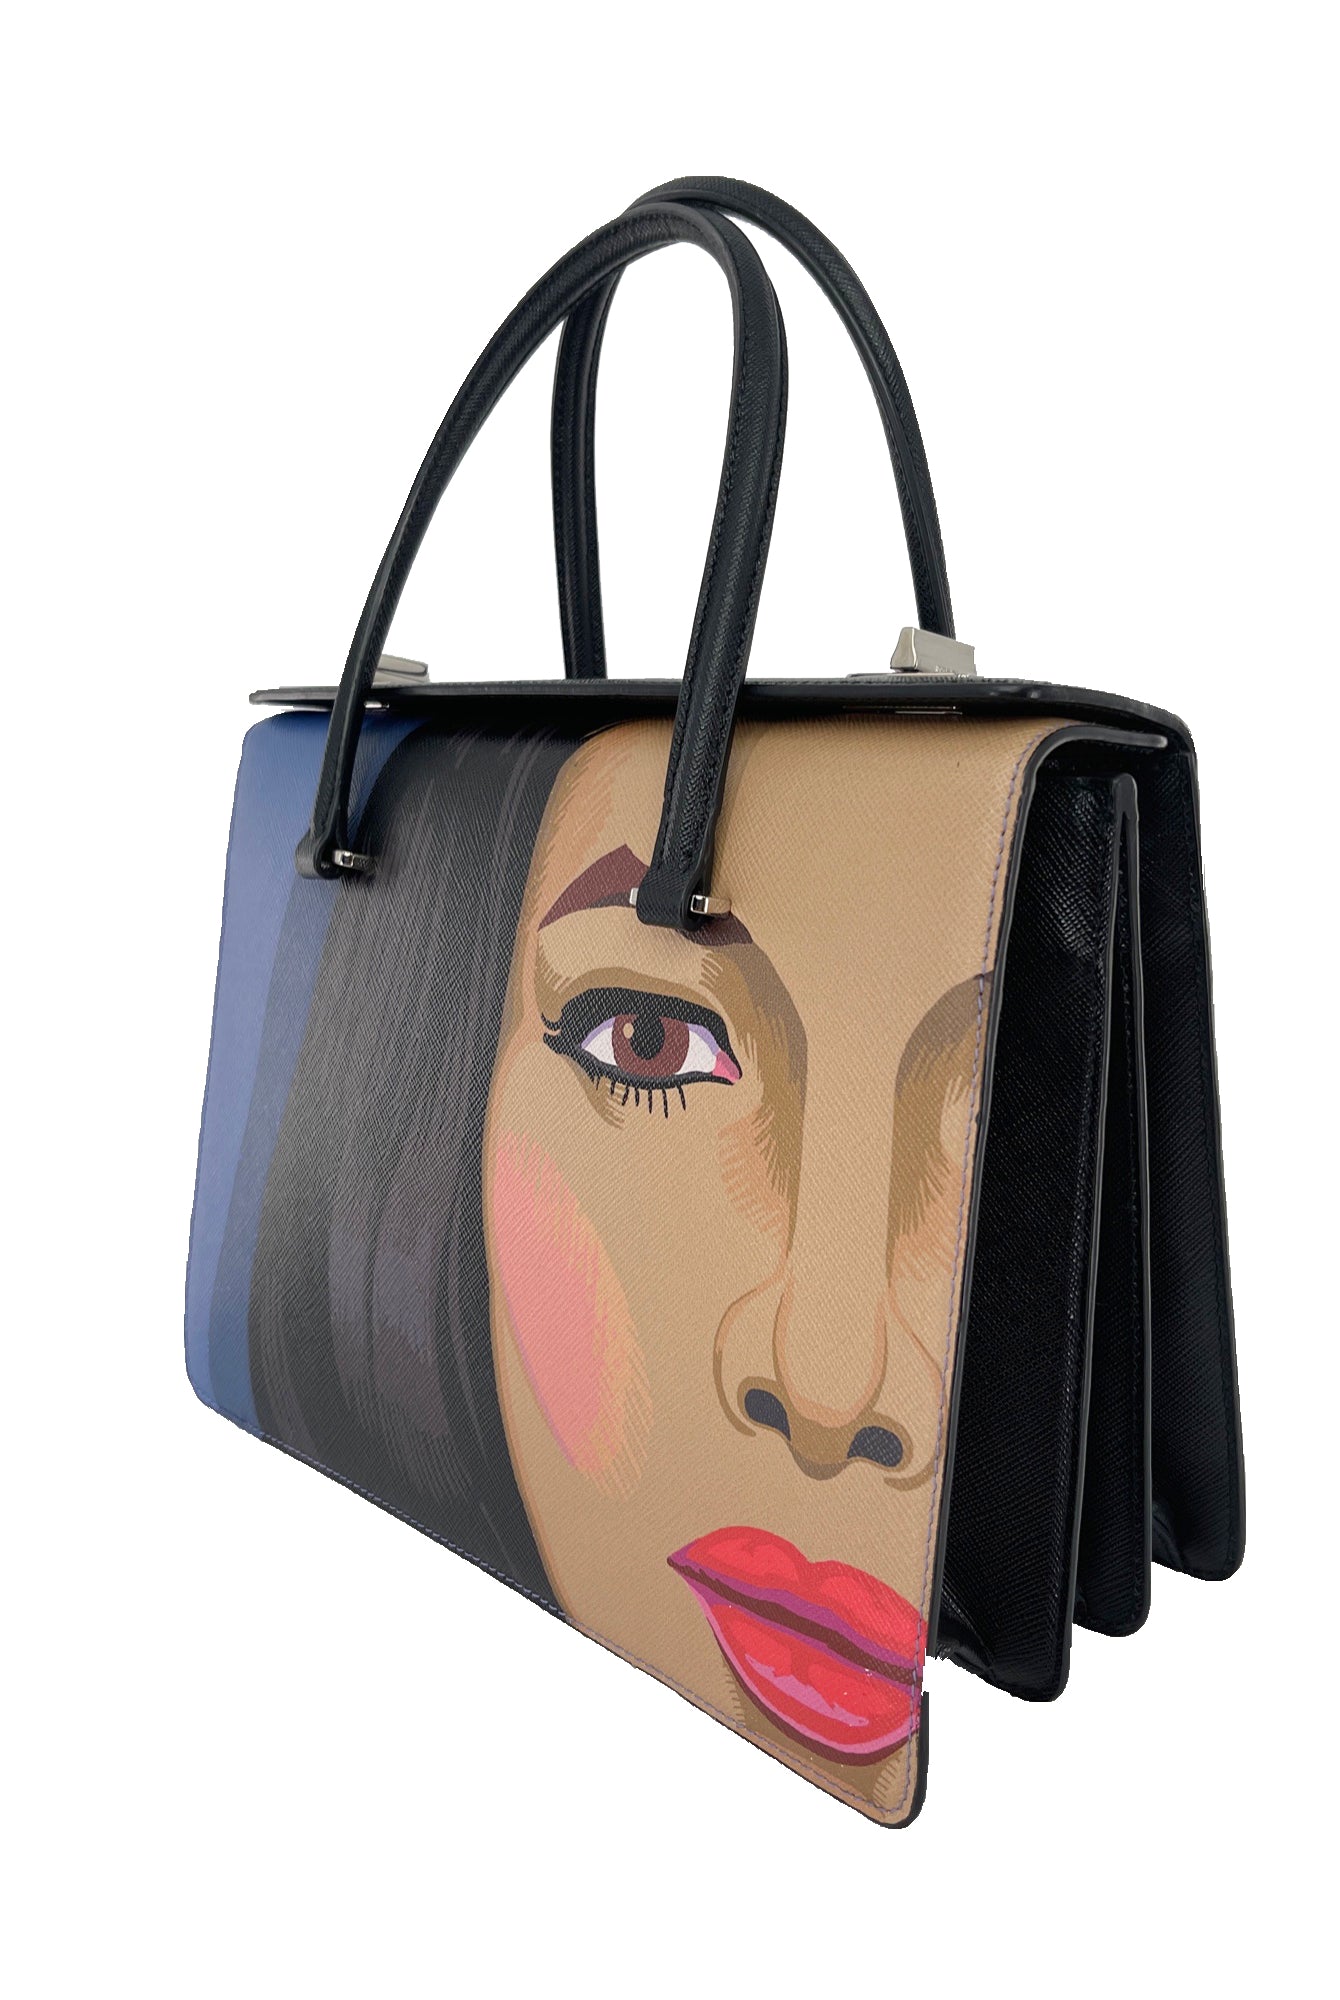 From the Spring/Summer 2014 Collection. Black leather Prada Saffiano Girl Print bag with dual rolled handles at top, silver-tone hardware, girl motif at front face, dual interior compartments, three pockets at interior walls; one with zip closure, one with flap closure and dual turn-lock closures at top. Made in Italy.